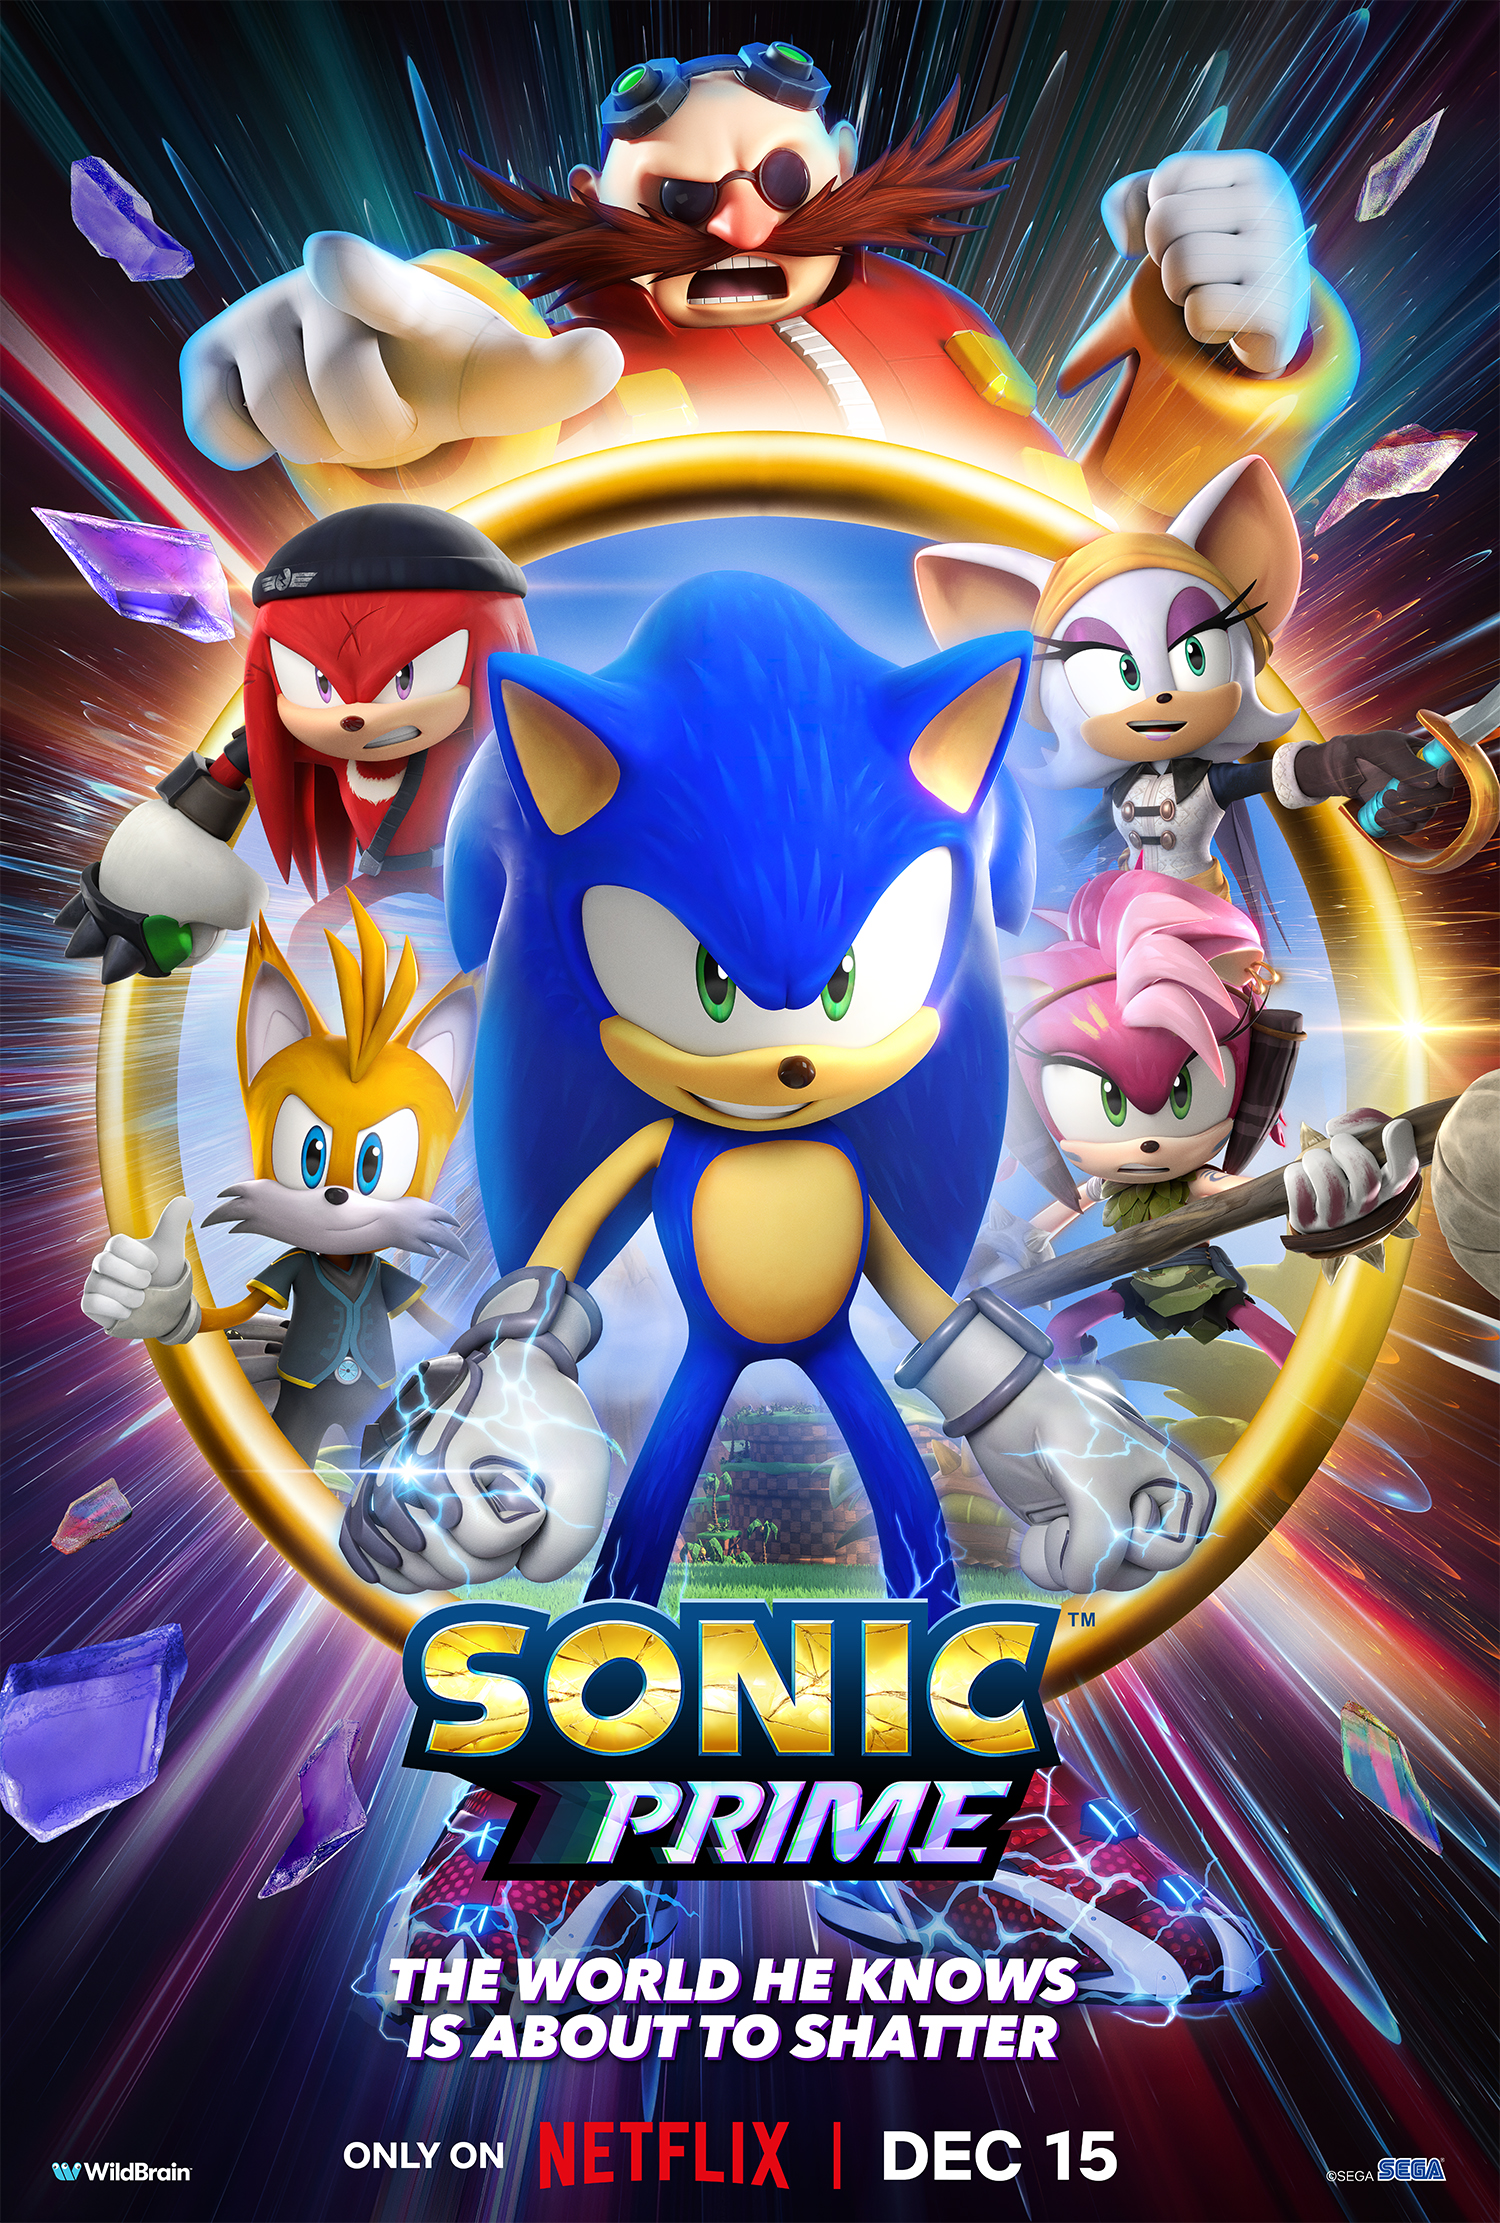 Netflix Geeked on X: Sonic Prime is coming to Netflix on December